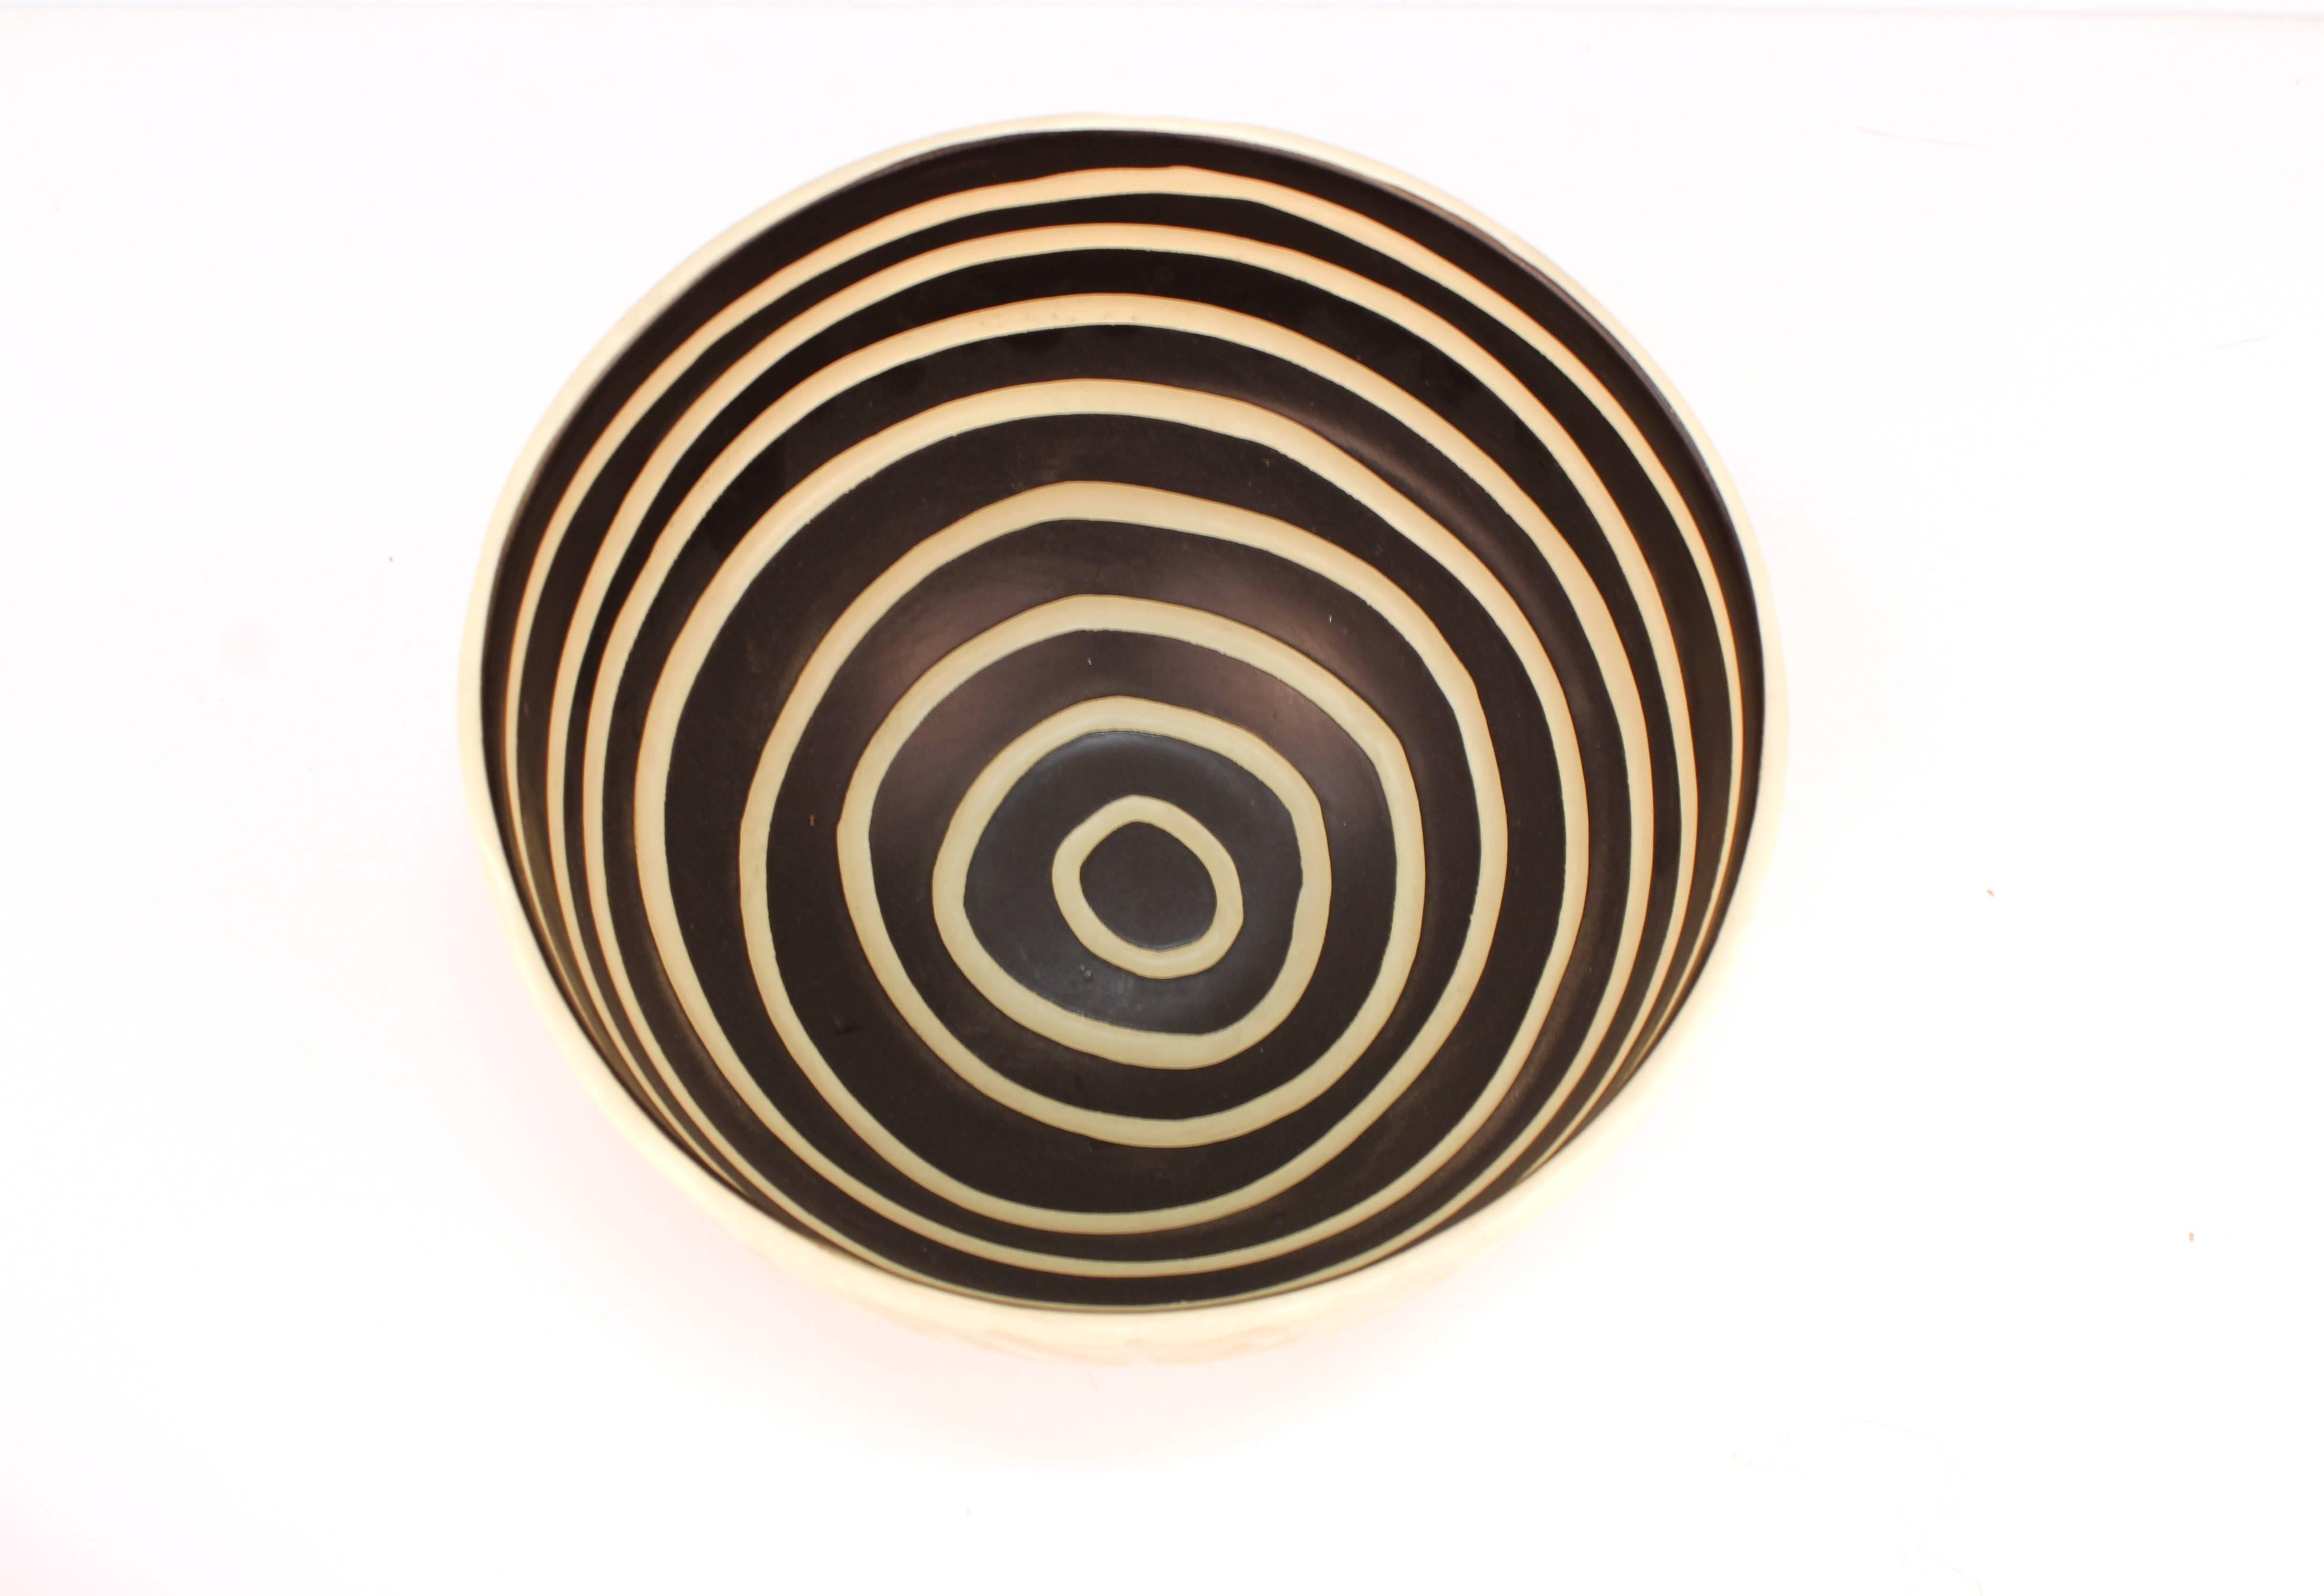 Ceramic Post-Modernist Pottery Bowl with Spiral and Striped Details